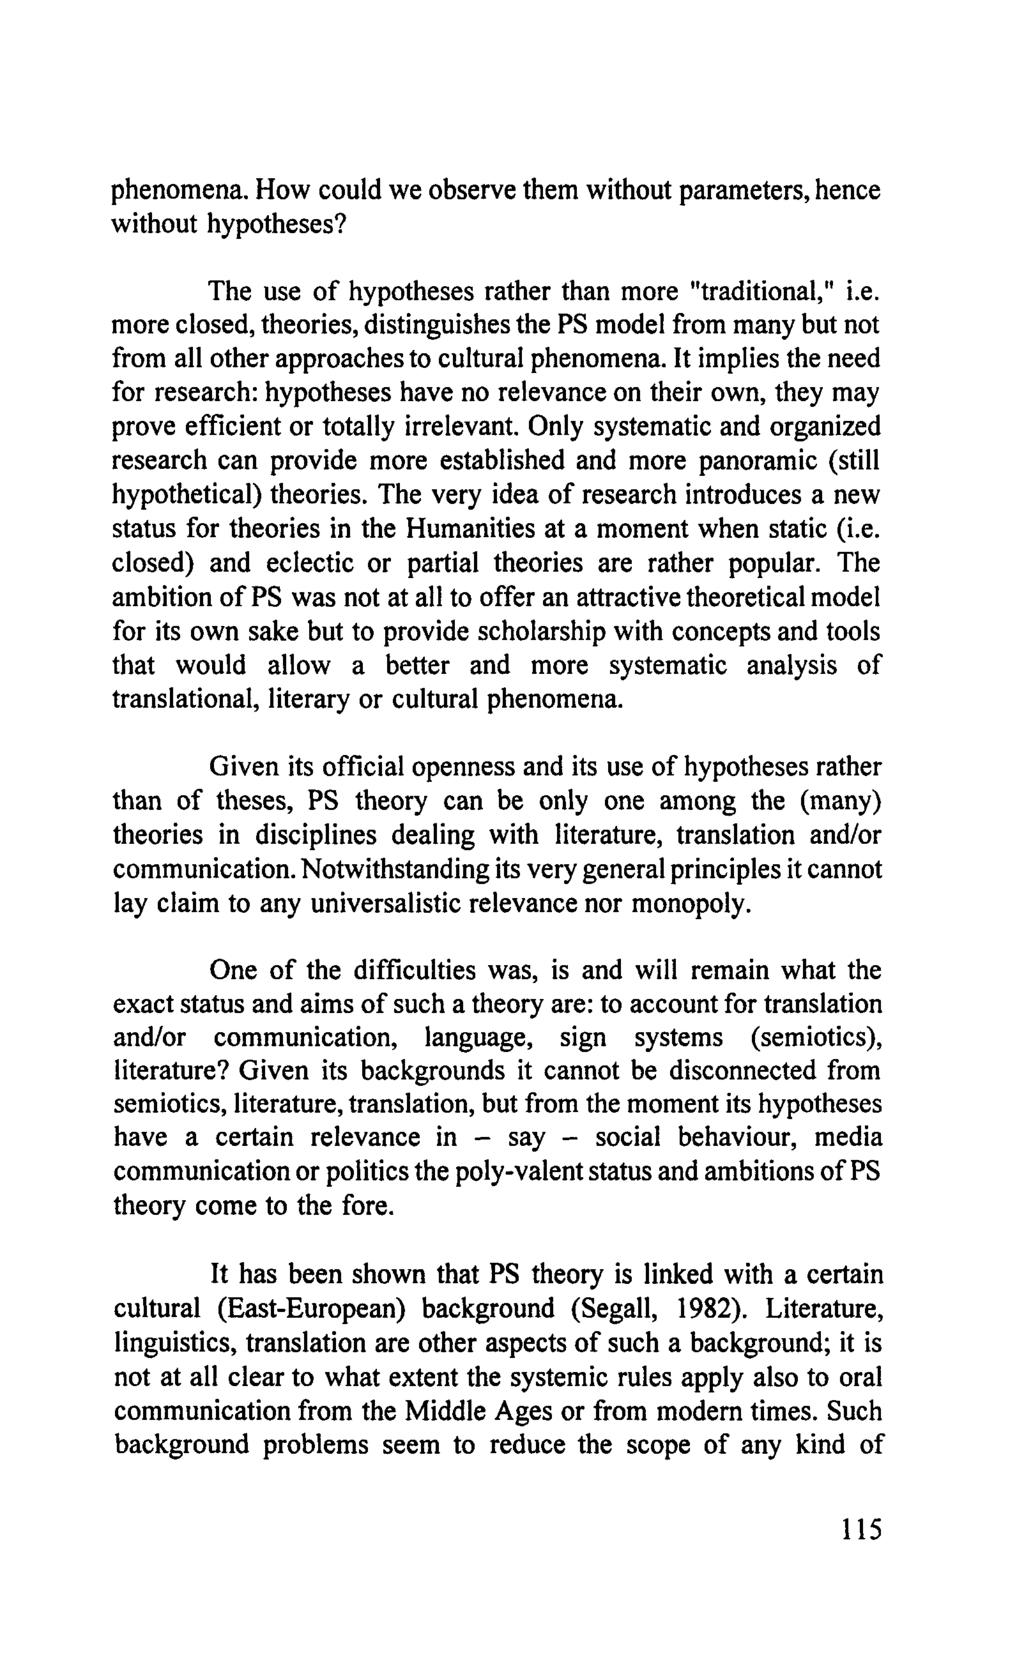 phenomena. How could we observe them without parameters, hence without hypotheses? The use of hypotheses rather than more "traditional," i.e. more closed, theories, distinguishes the PS model from many but not from all other approaches to cultural phenomena.